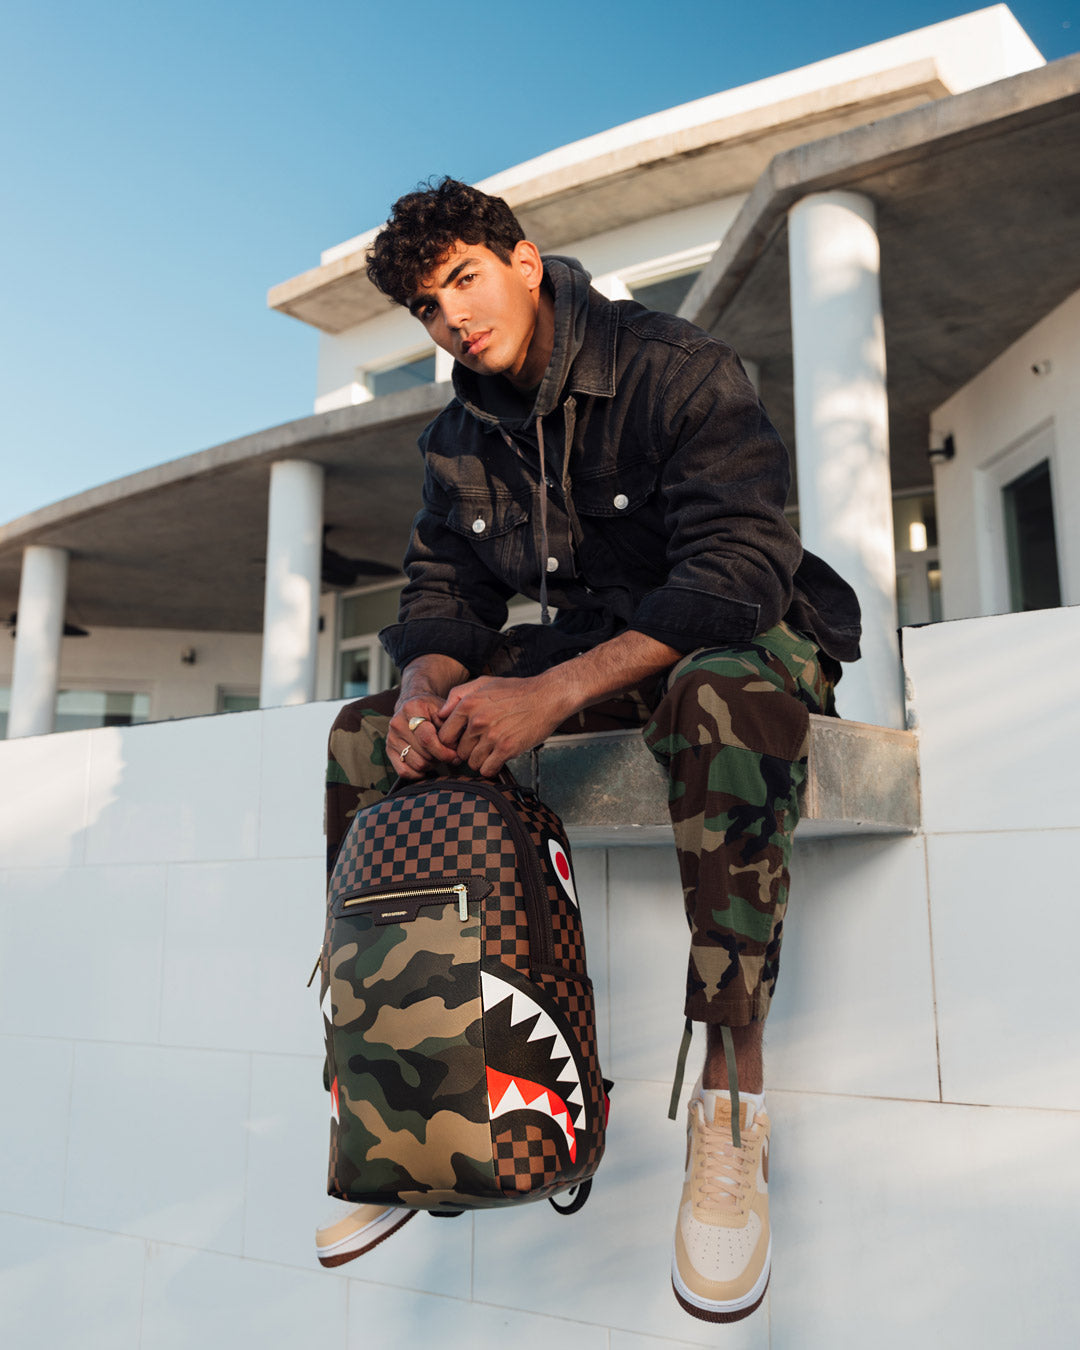 Sprayground Exterior Gold Zip Pocket Sharks in Paris Savage Backpack, Cooler than LV, Juxtaposed patterns with shark mouth graphic…